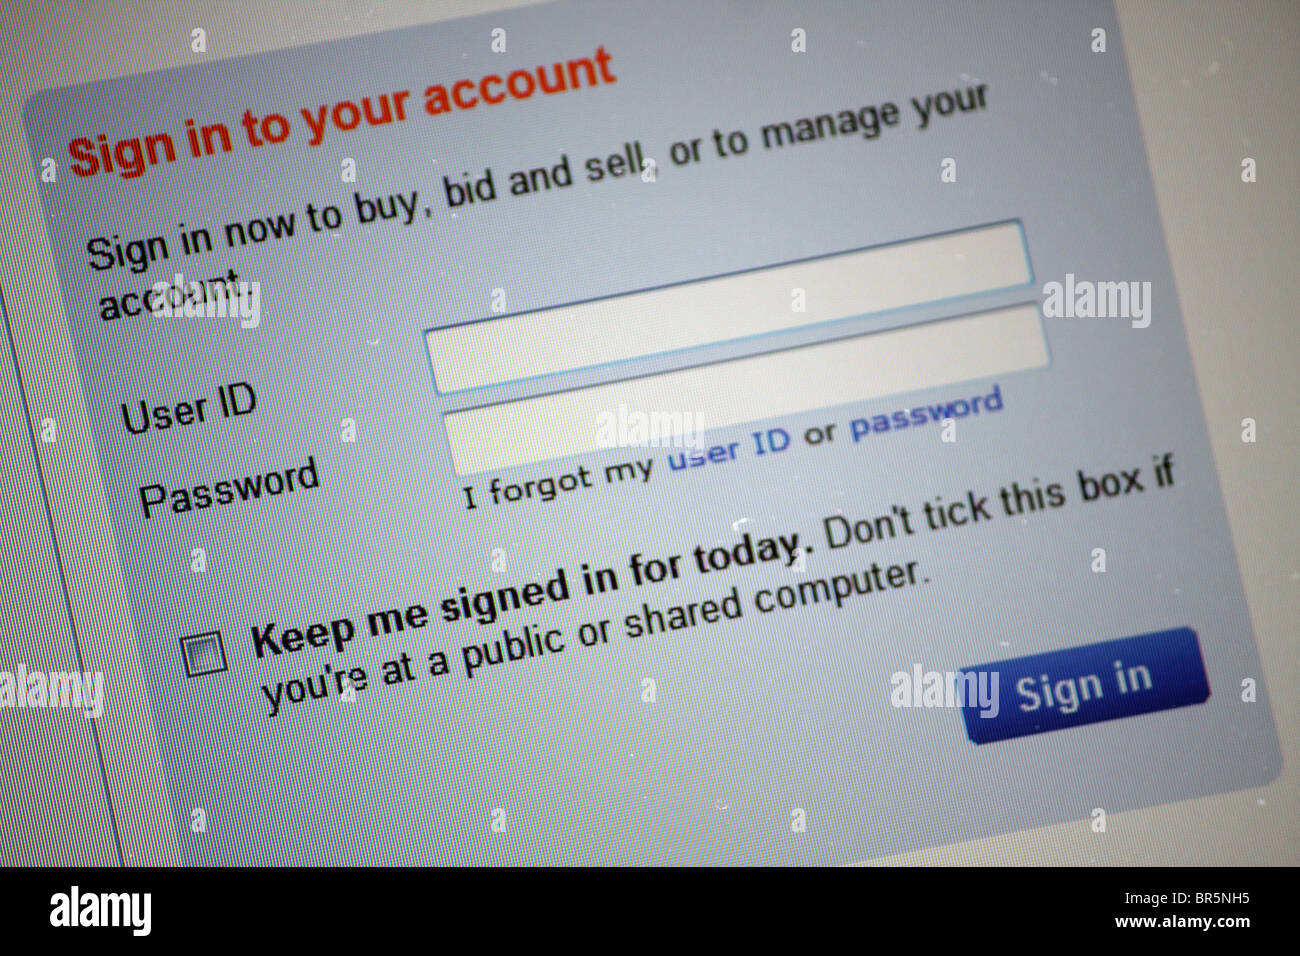 The sign in account web page for the eBay online auction website on the internet. Stock Photo